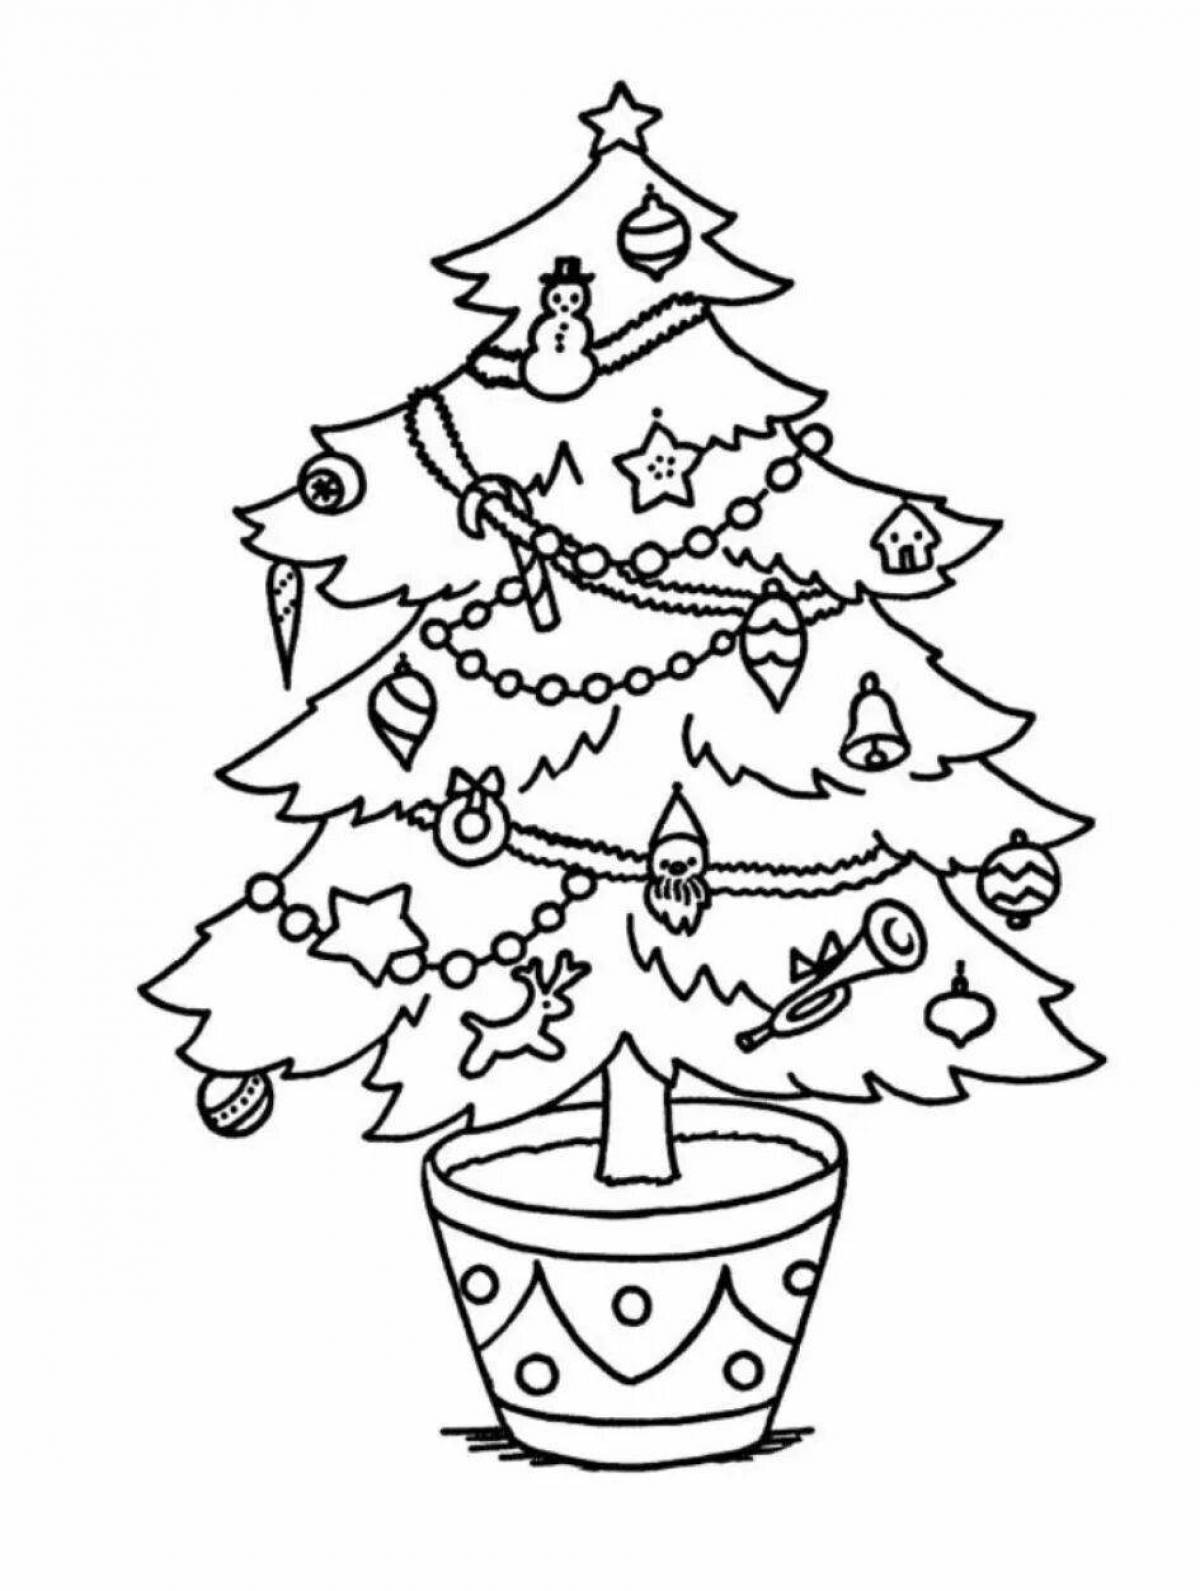 Coloring book festive Christmas tree for children 6-7 years old